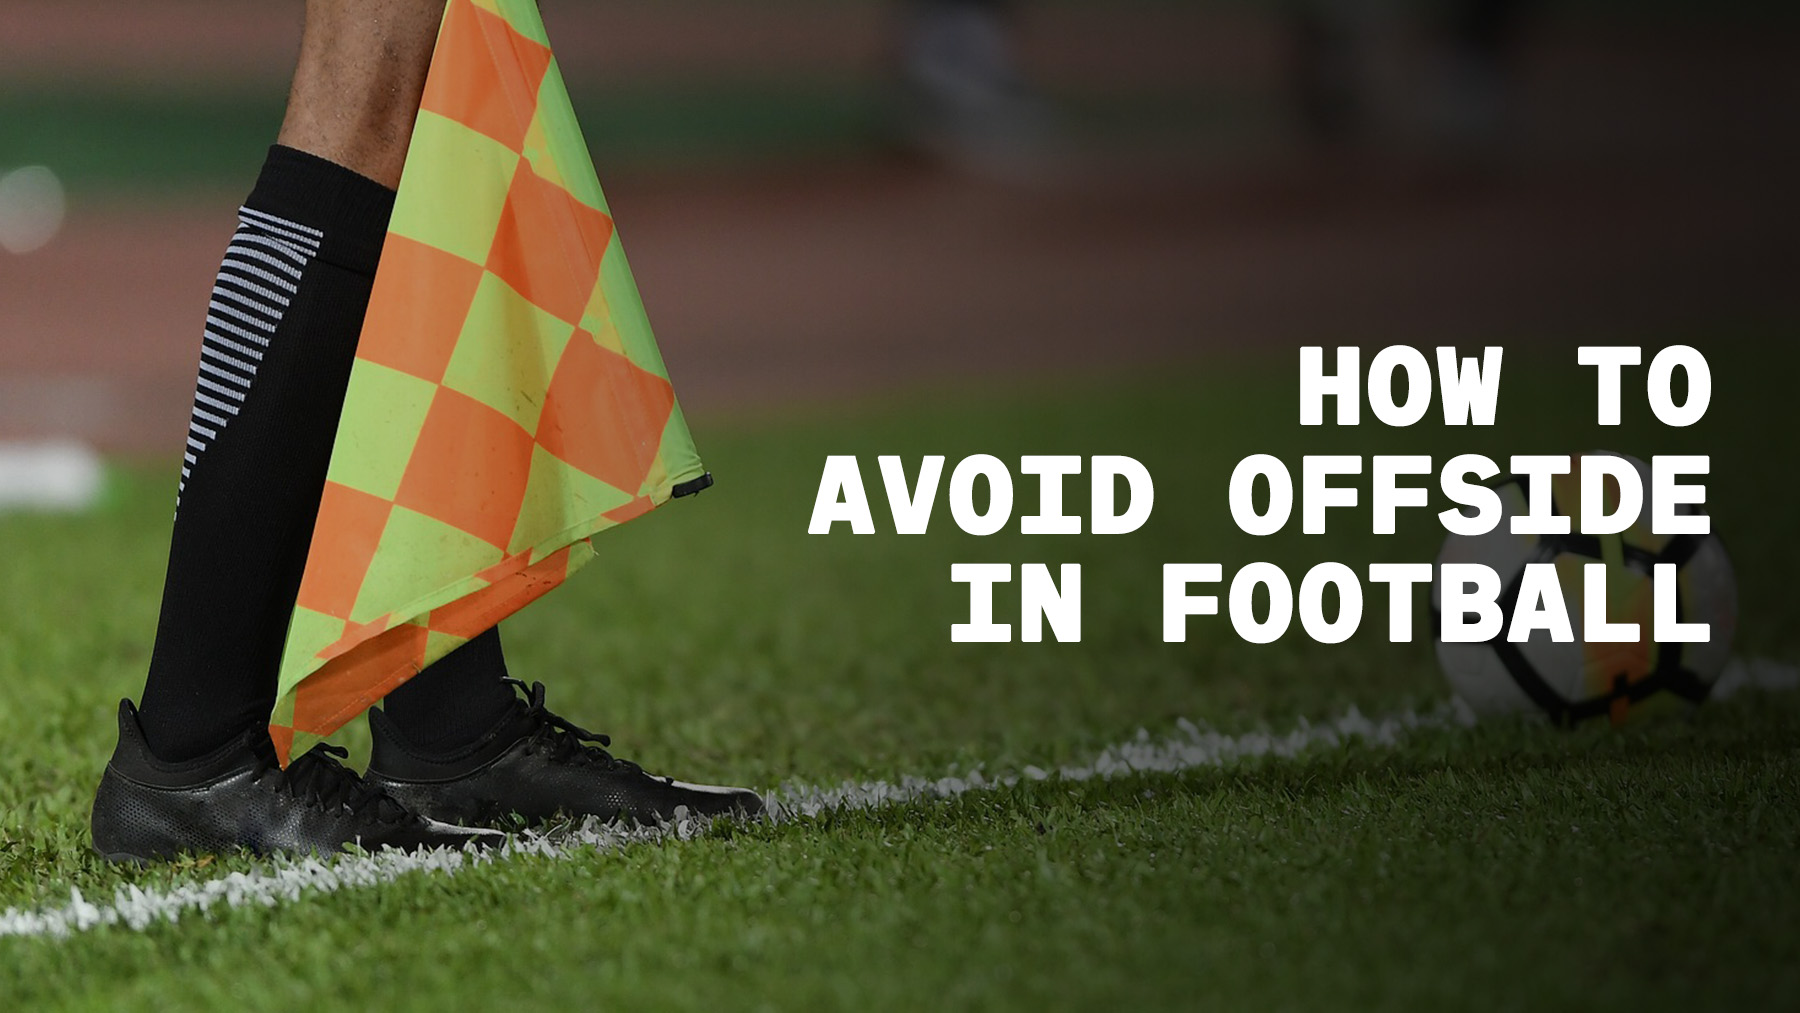 How to Avoid Offside in Football